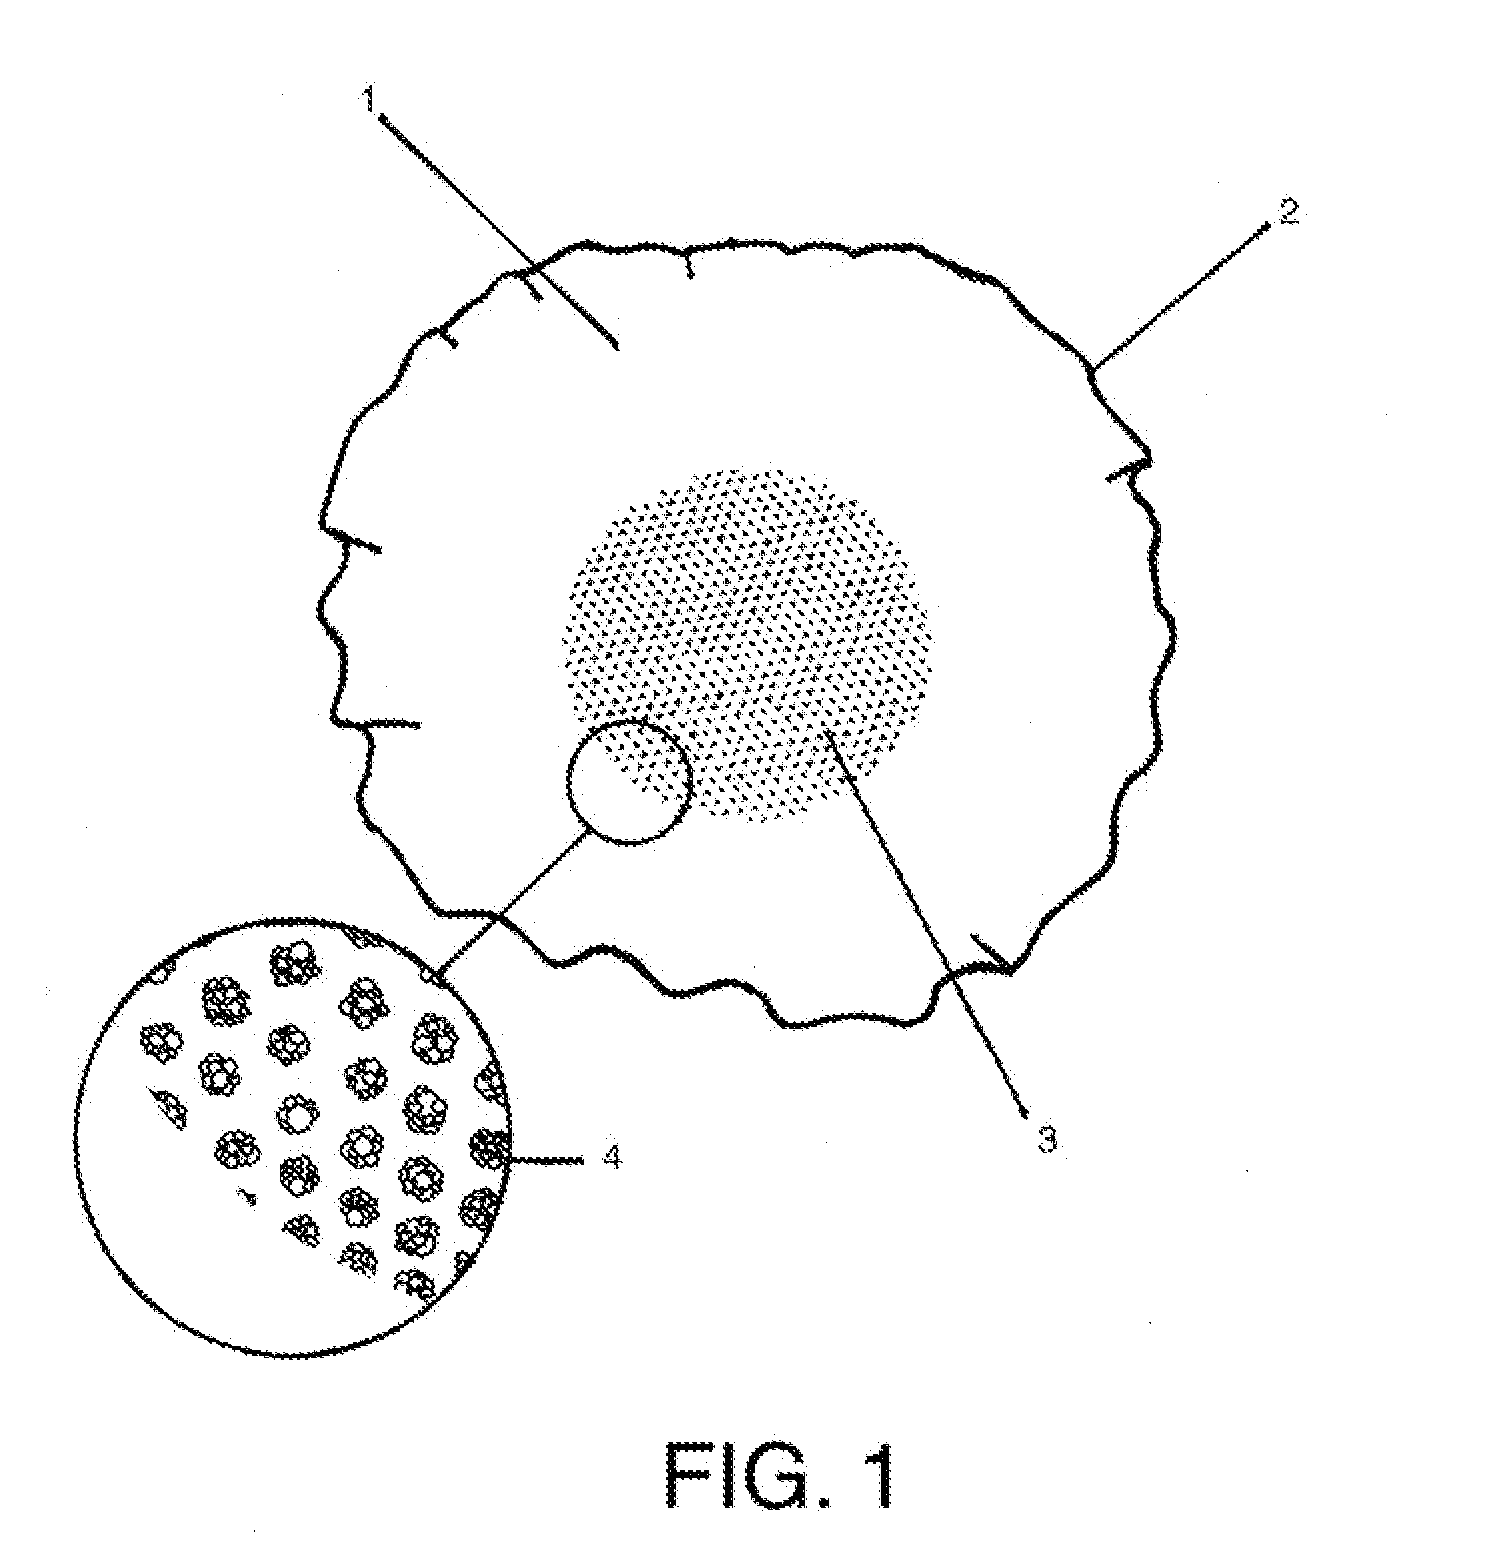 Method of enhancing beverages by means of a unique microencapsulated delivery system